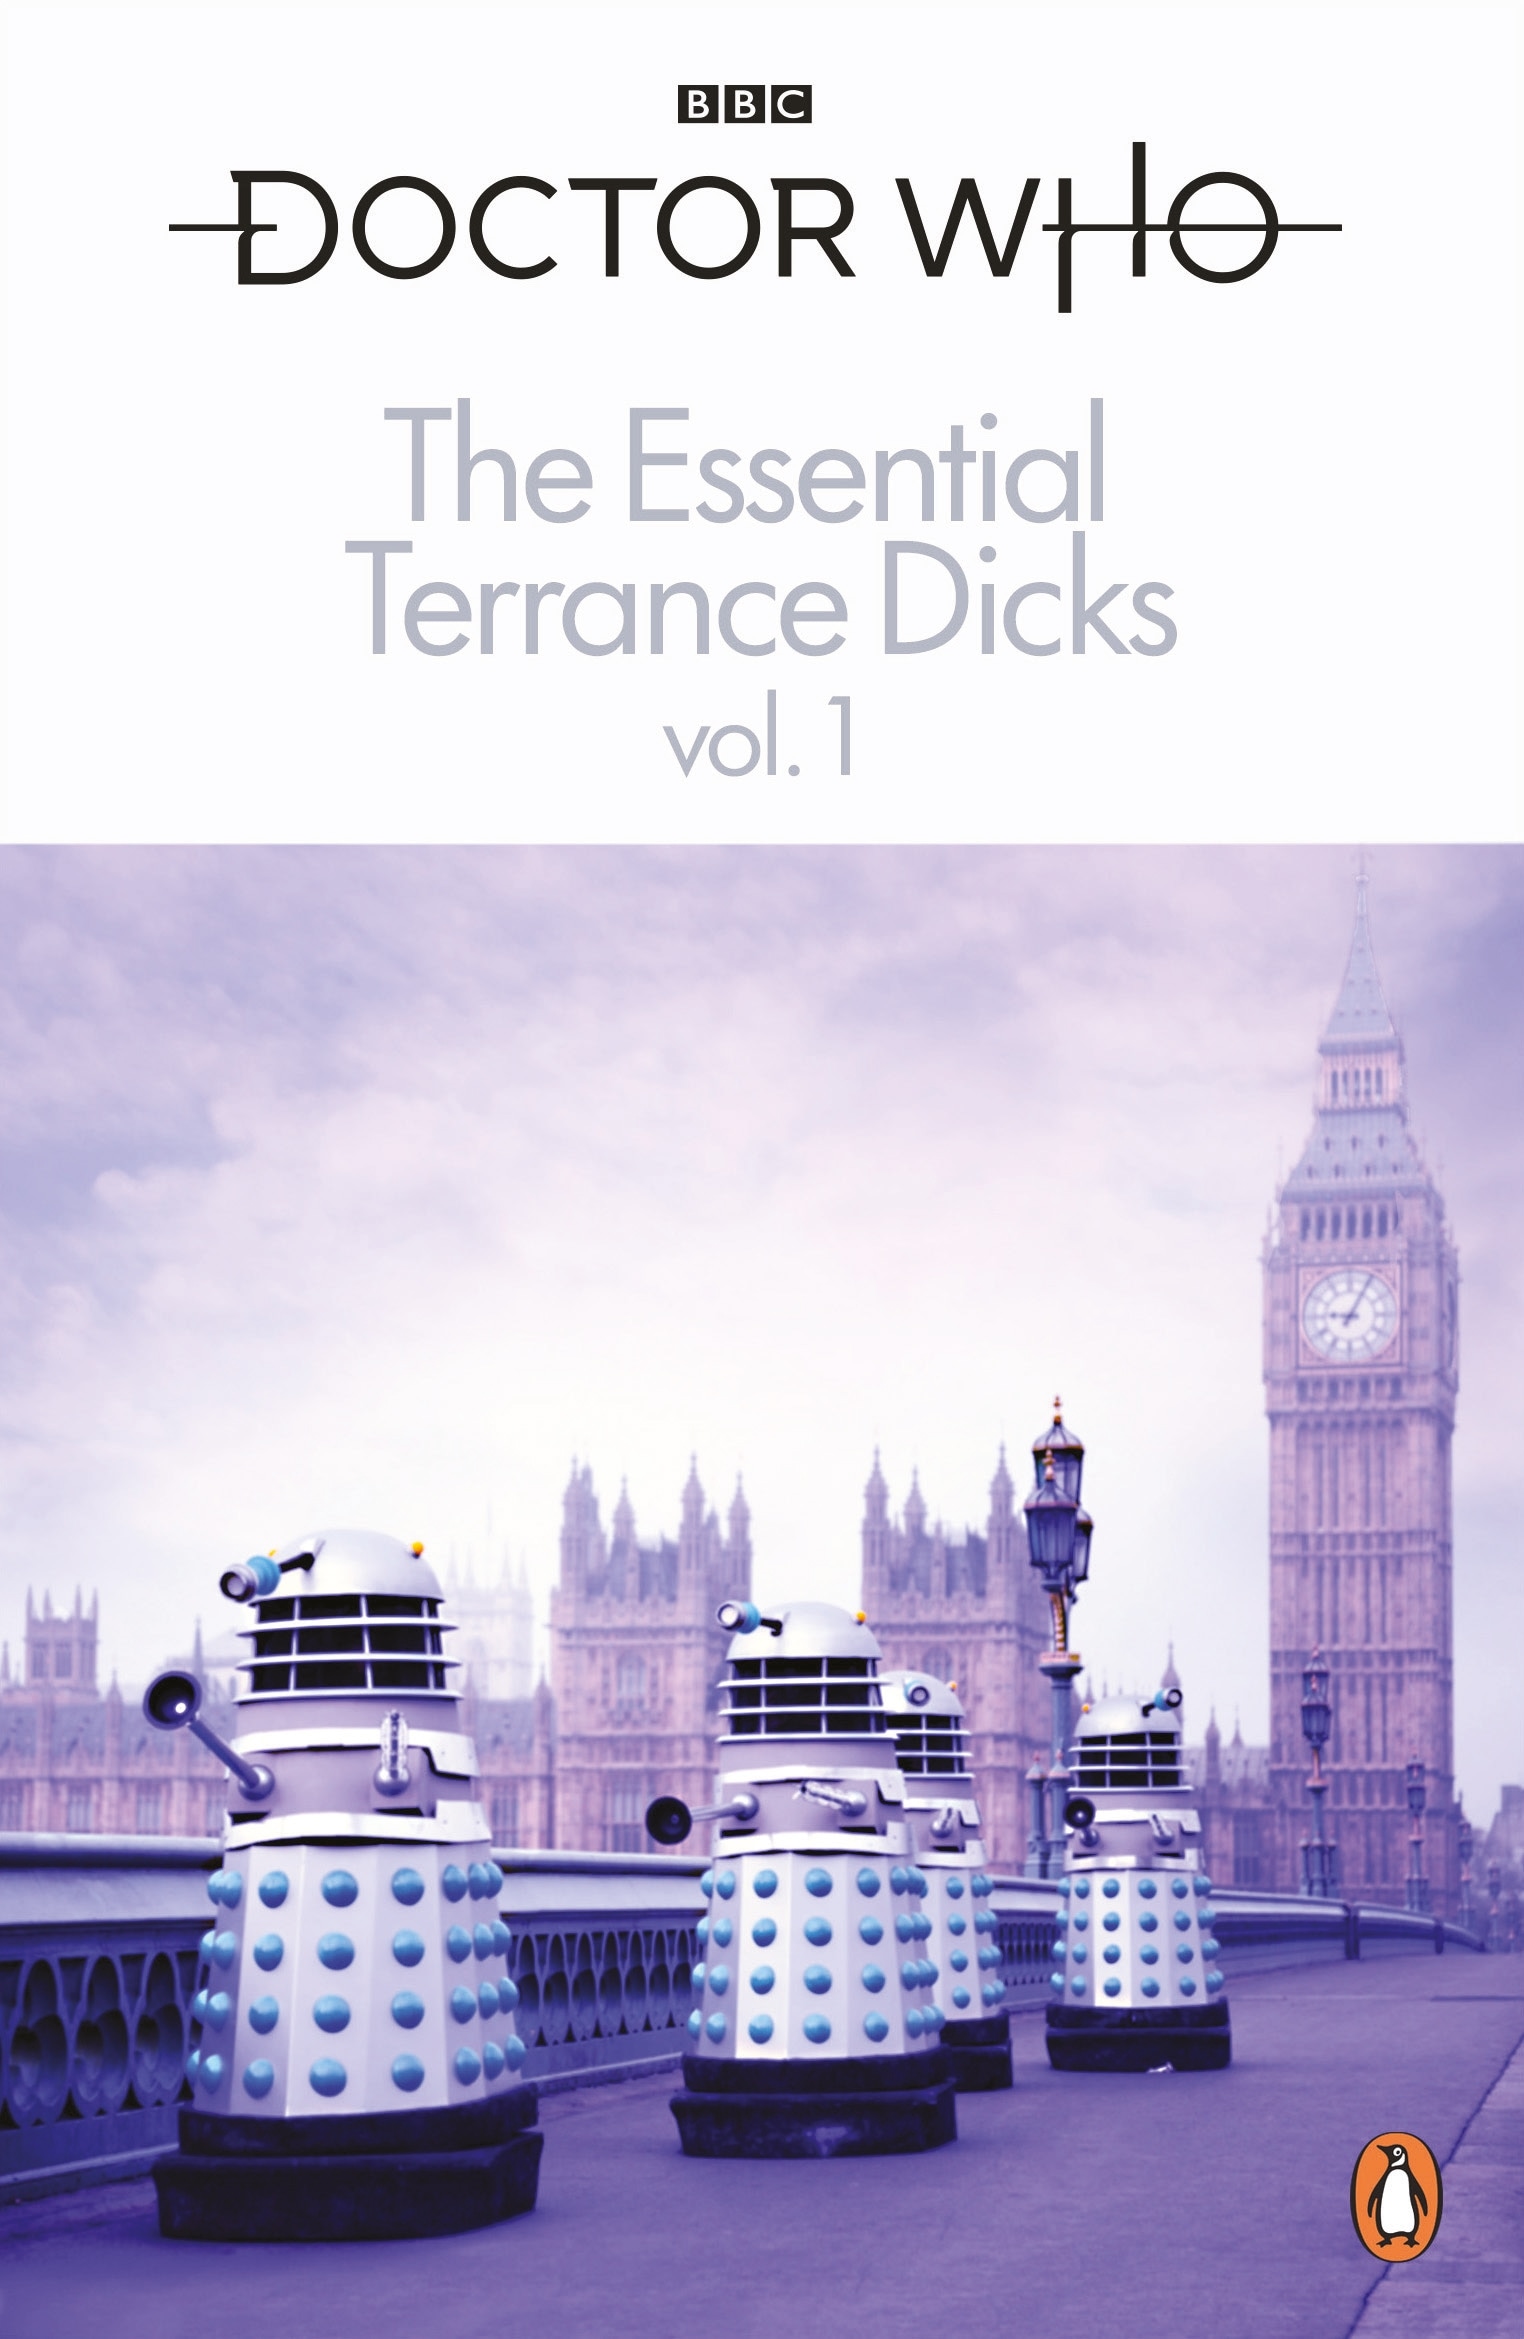 Book “The Essential Terrance Dicks Volume 1” by Terrance Dicks — May 5, 2022